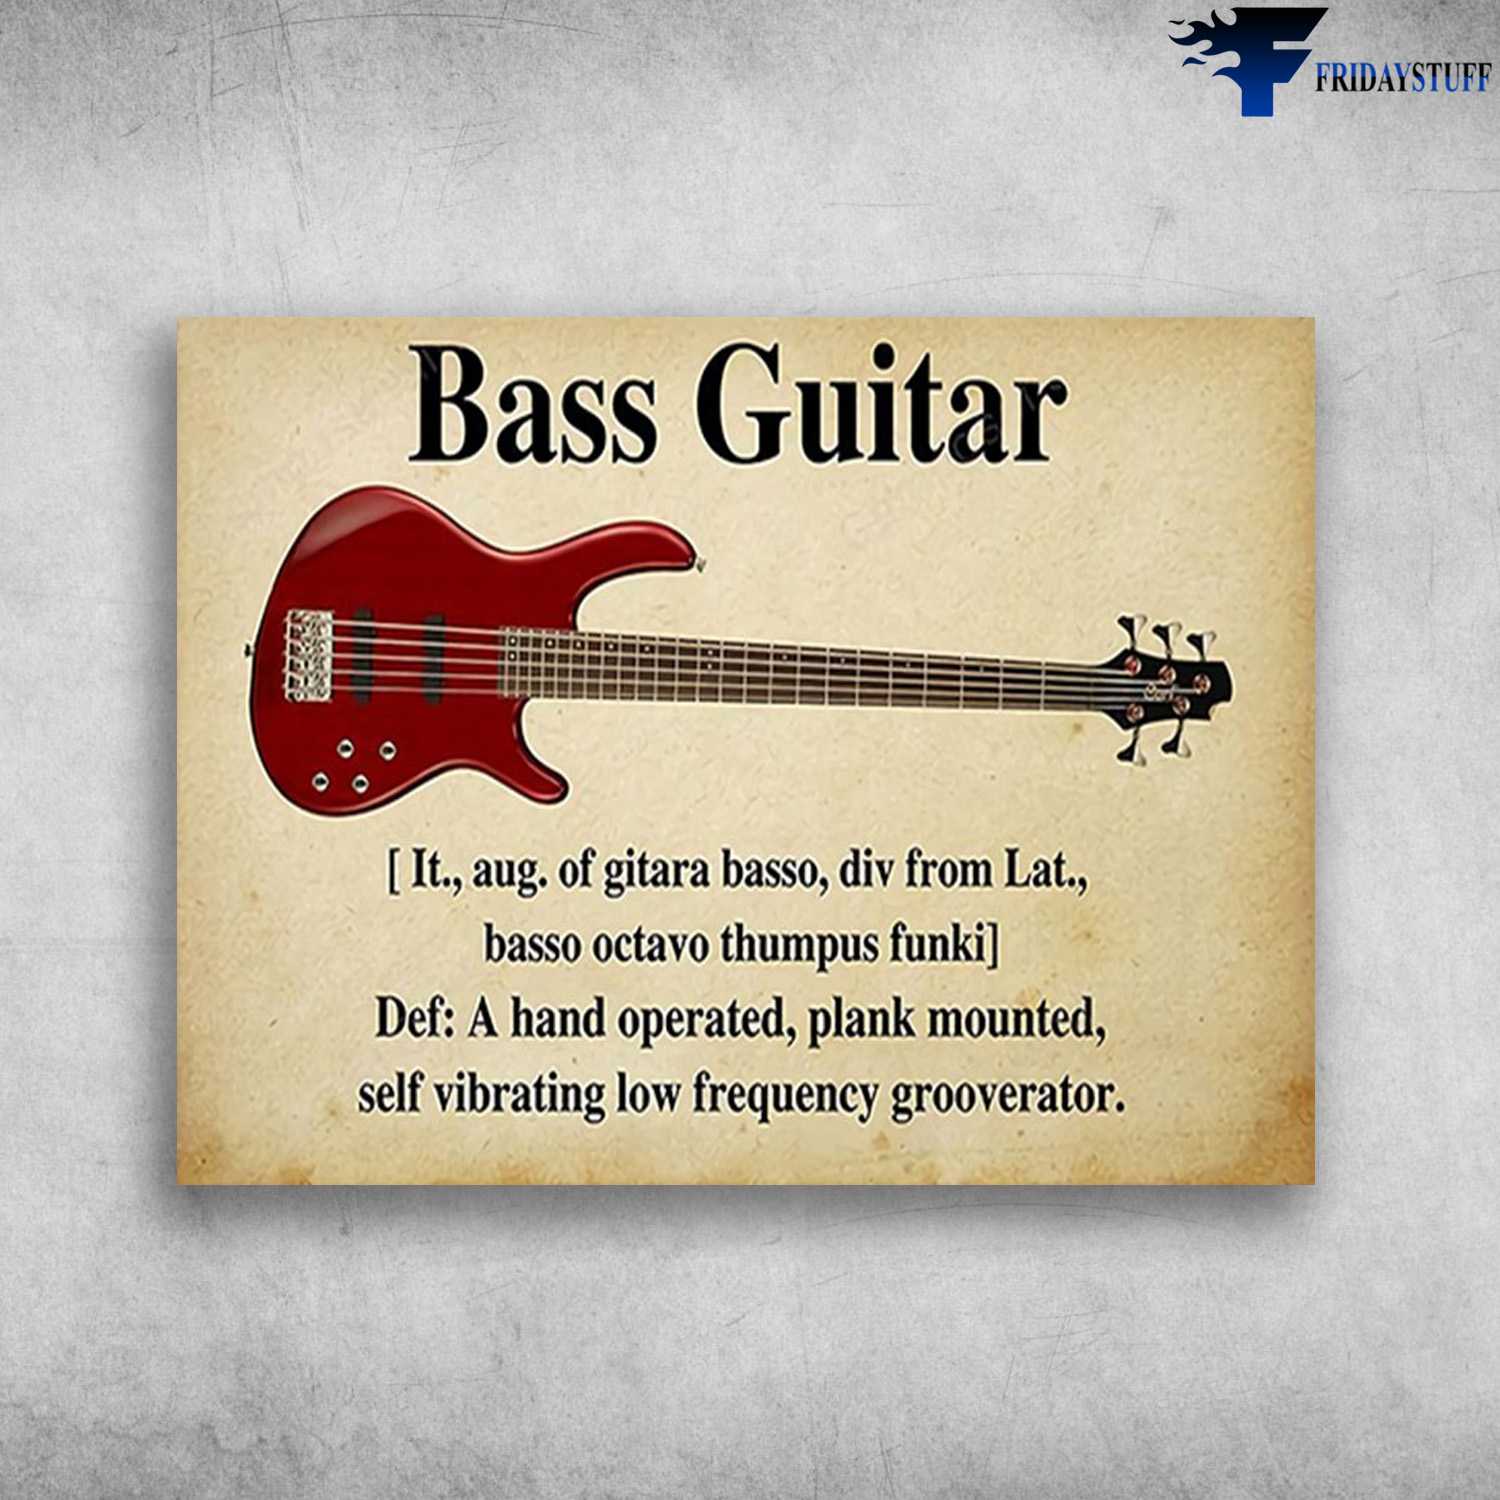 Bass Guitar, Guitar Lover - Basso Octavo Thumpus Funki, Def A Hand Operated, Plank Mounted, Self Vibrating Low Frequency Grooverator